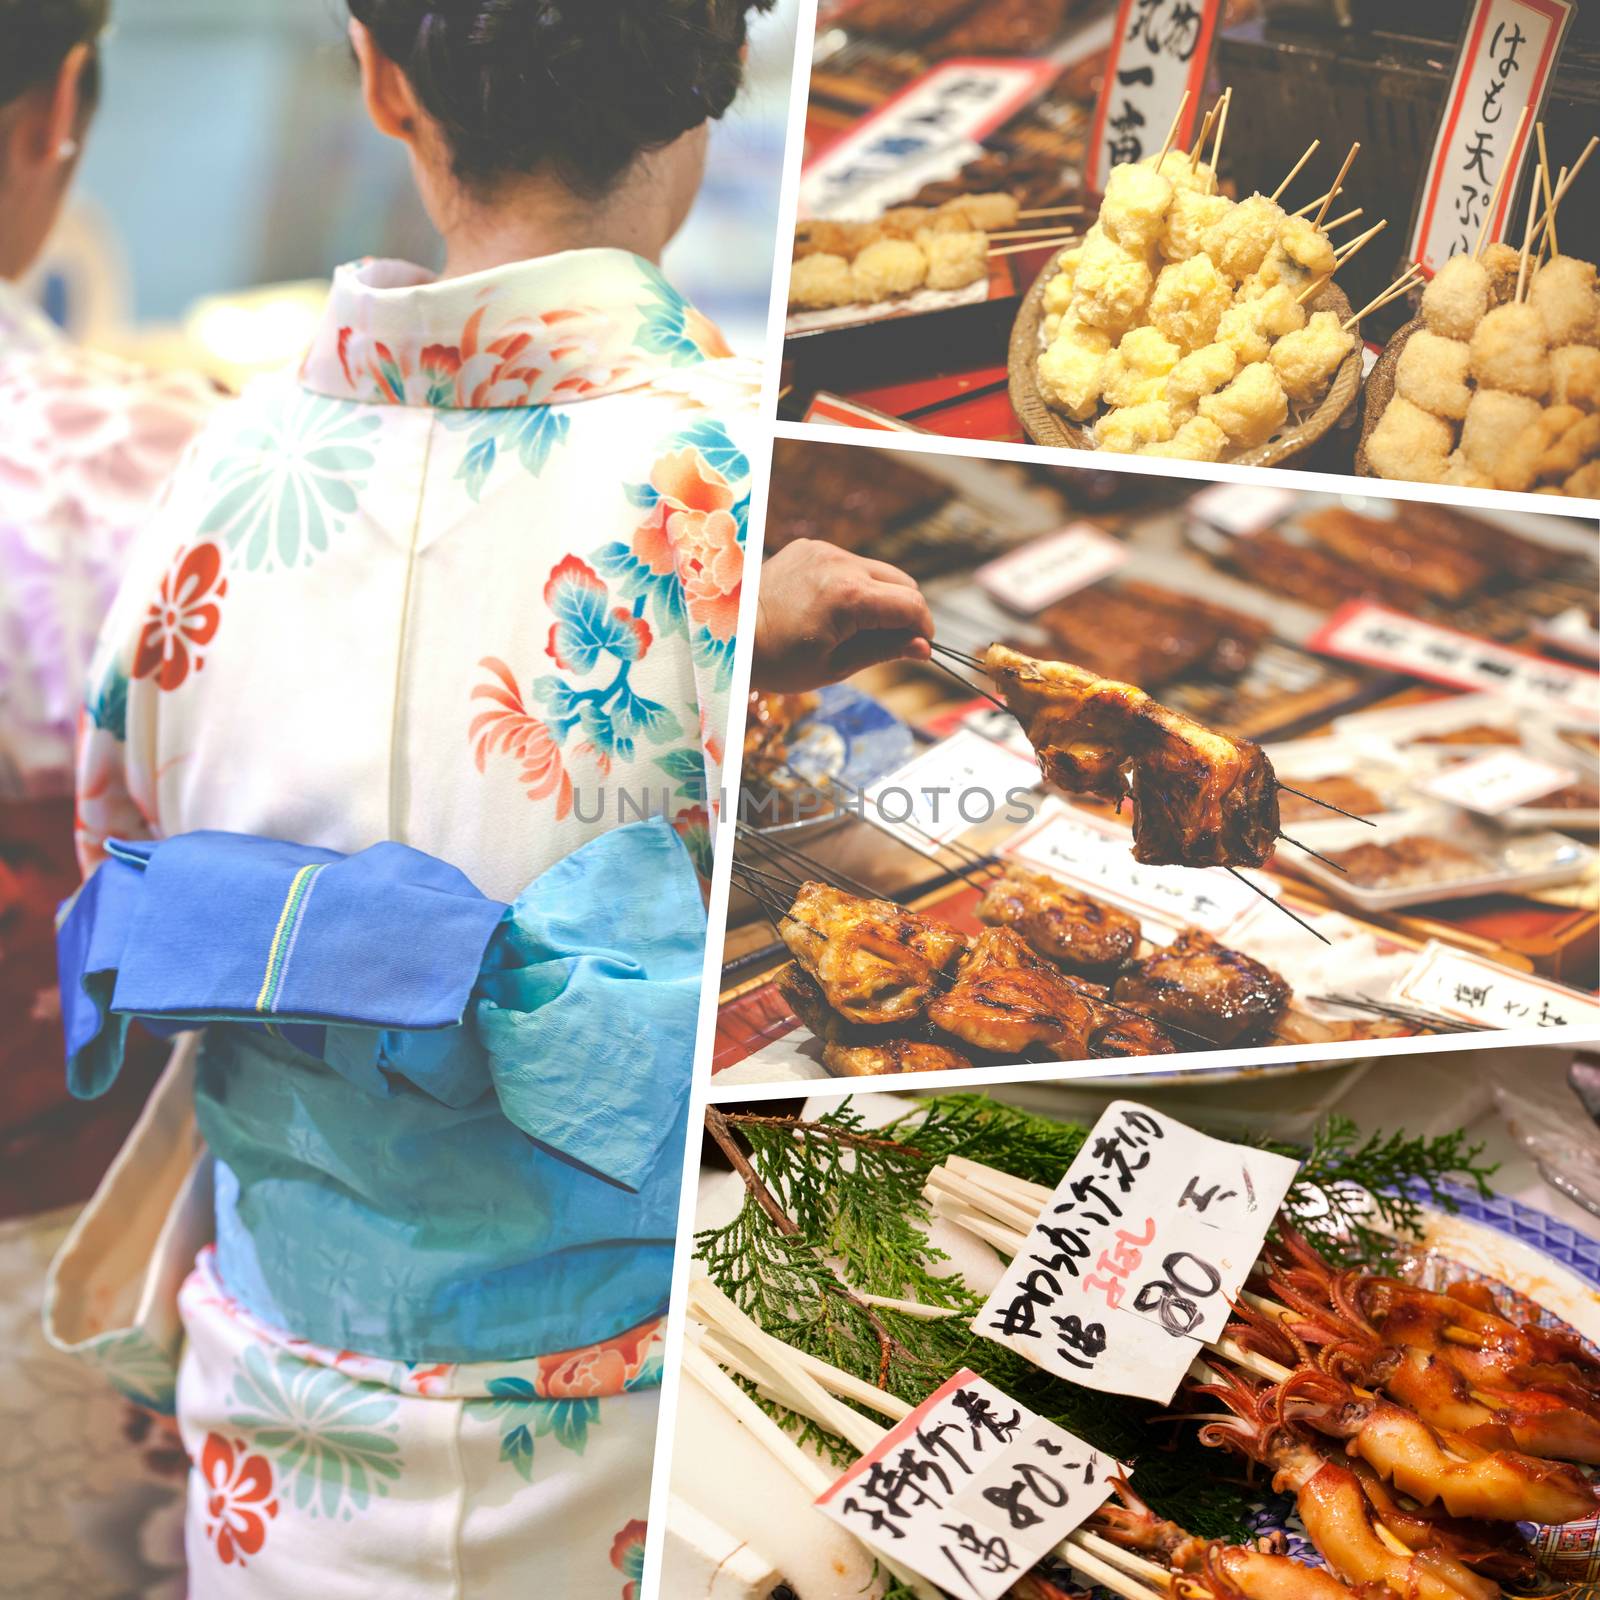 Collage of Japan food images - travel background (my photos) by mariusz_prusaczyk